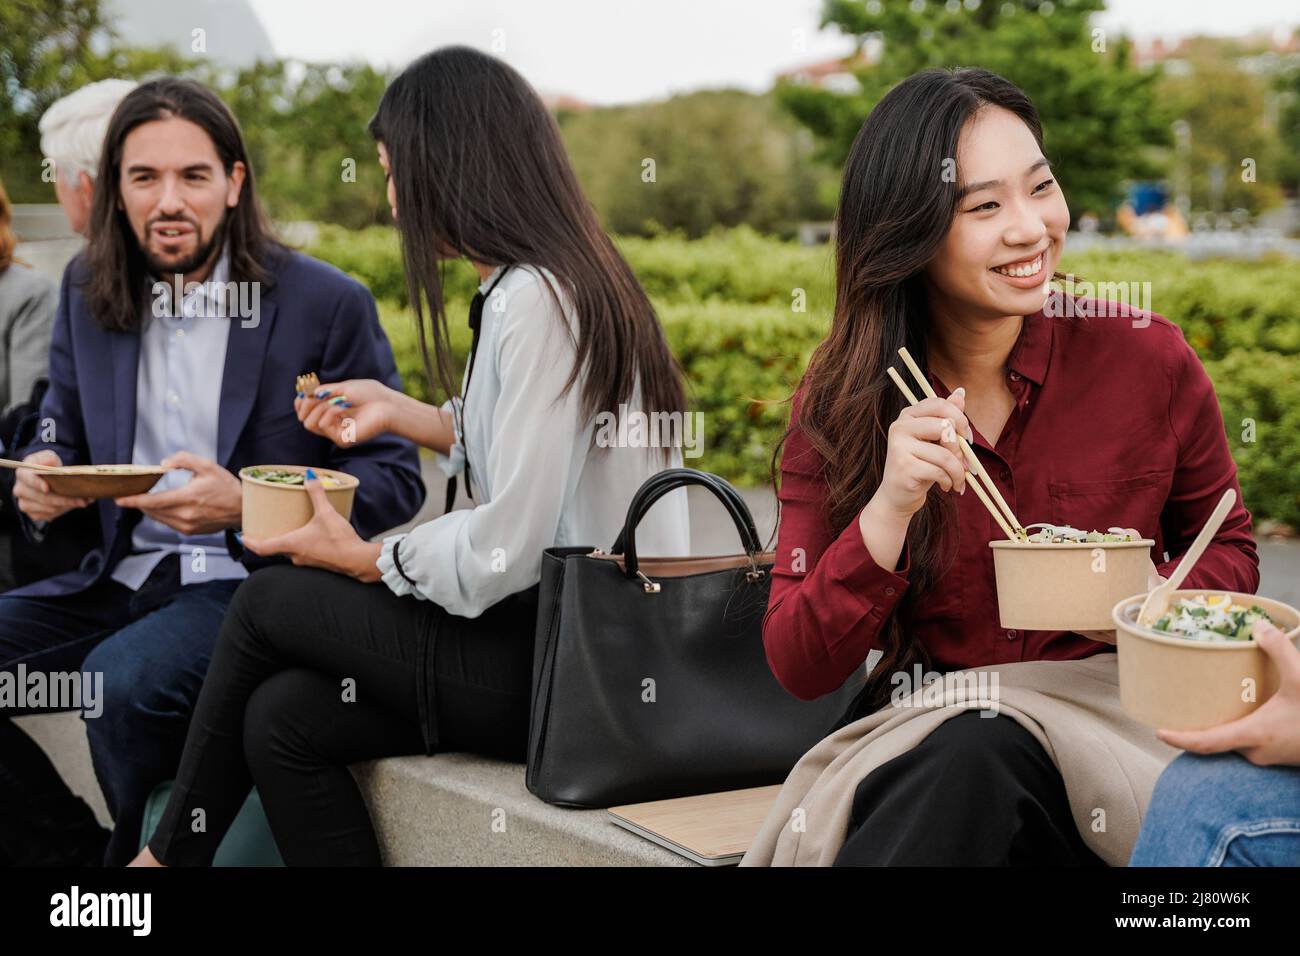 Multiethnic business people eating takeaway food during lunch break outdoor outside the office - Focus on Asian woman face Stock Photo